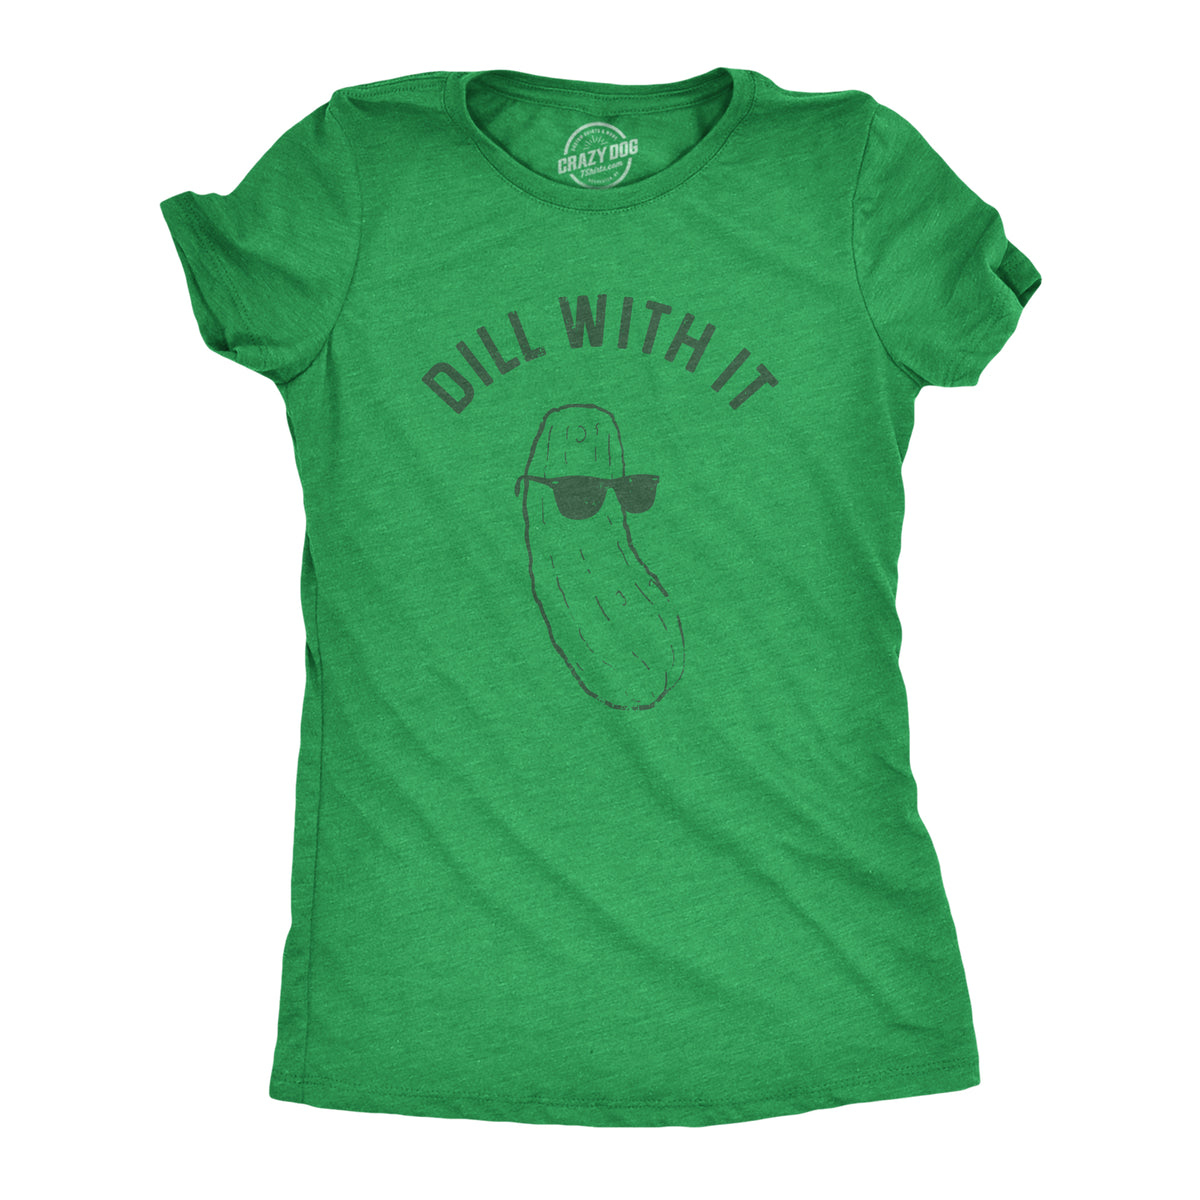 Funny Heather Green Dill With It Womens T Shirt Nerdy Food Tee